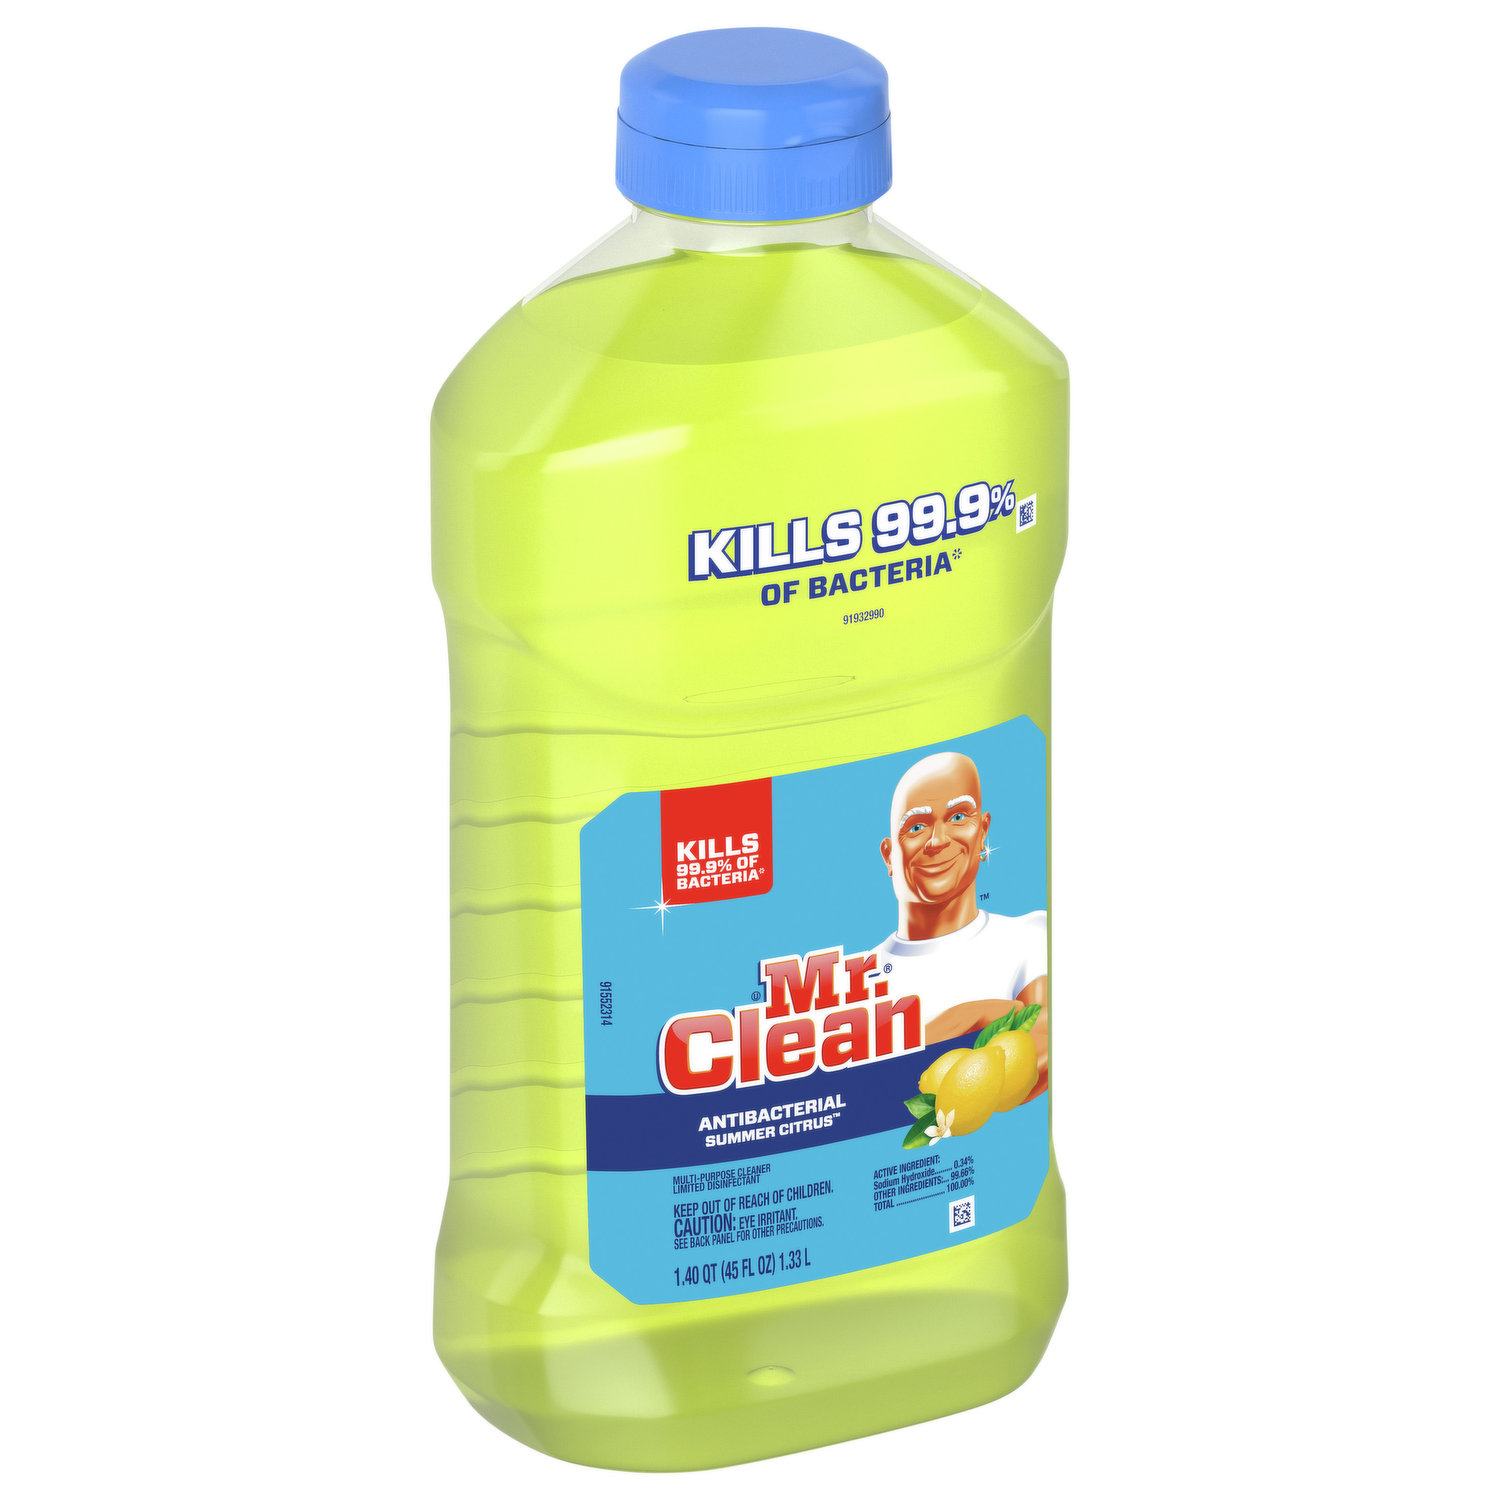 Shop Mr. Clean Bathroom Cleaning Essentials at